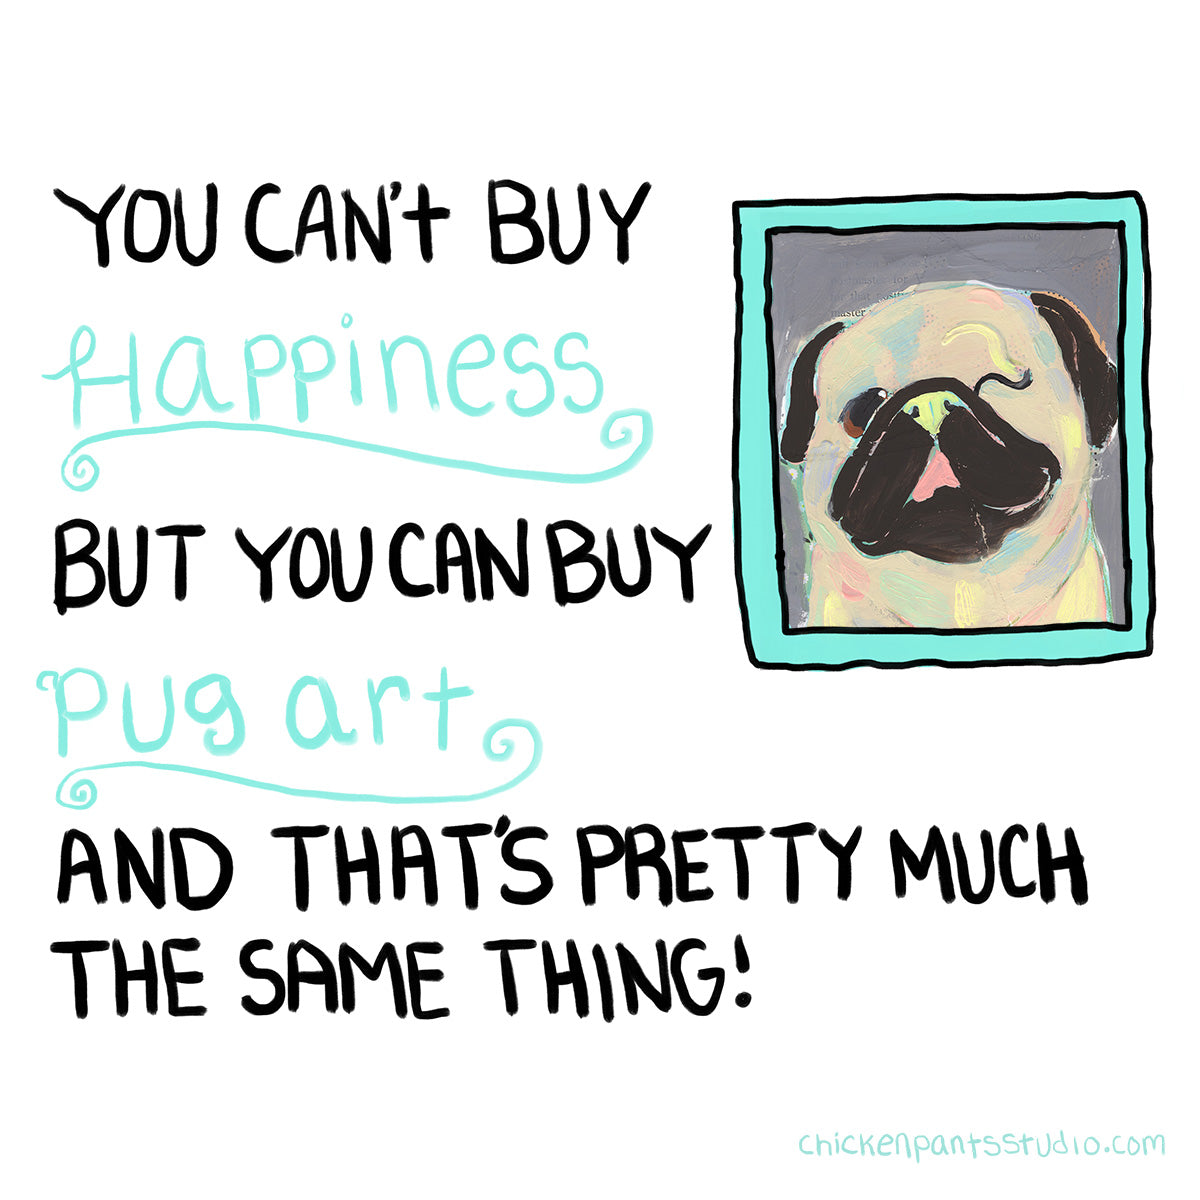 Happy As A Pug With French Fries - Original Pug Painting